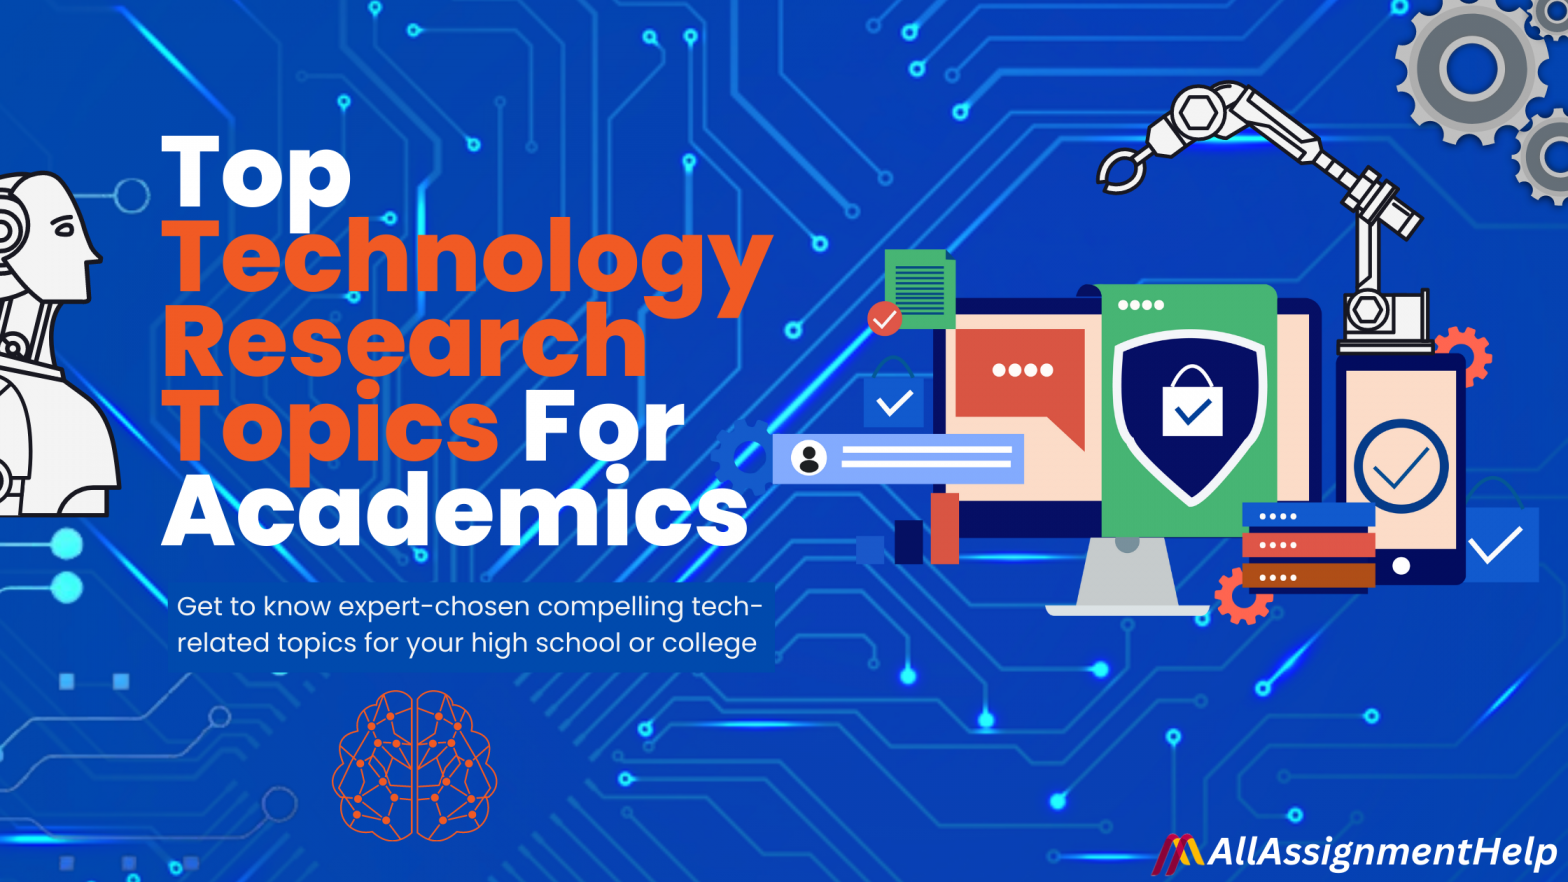 Technology research topics